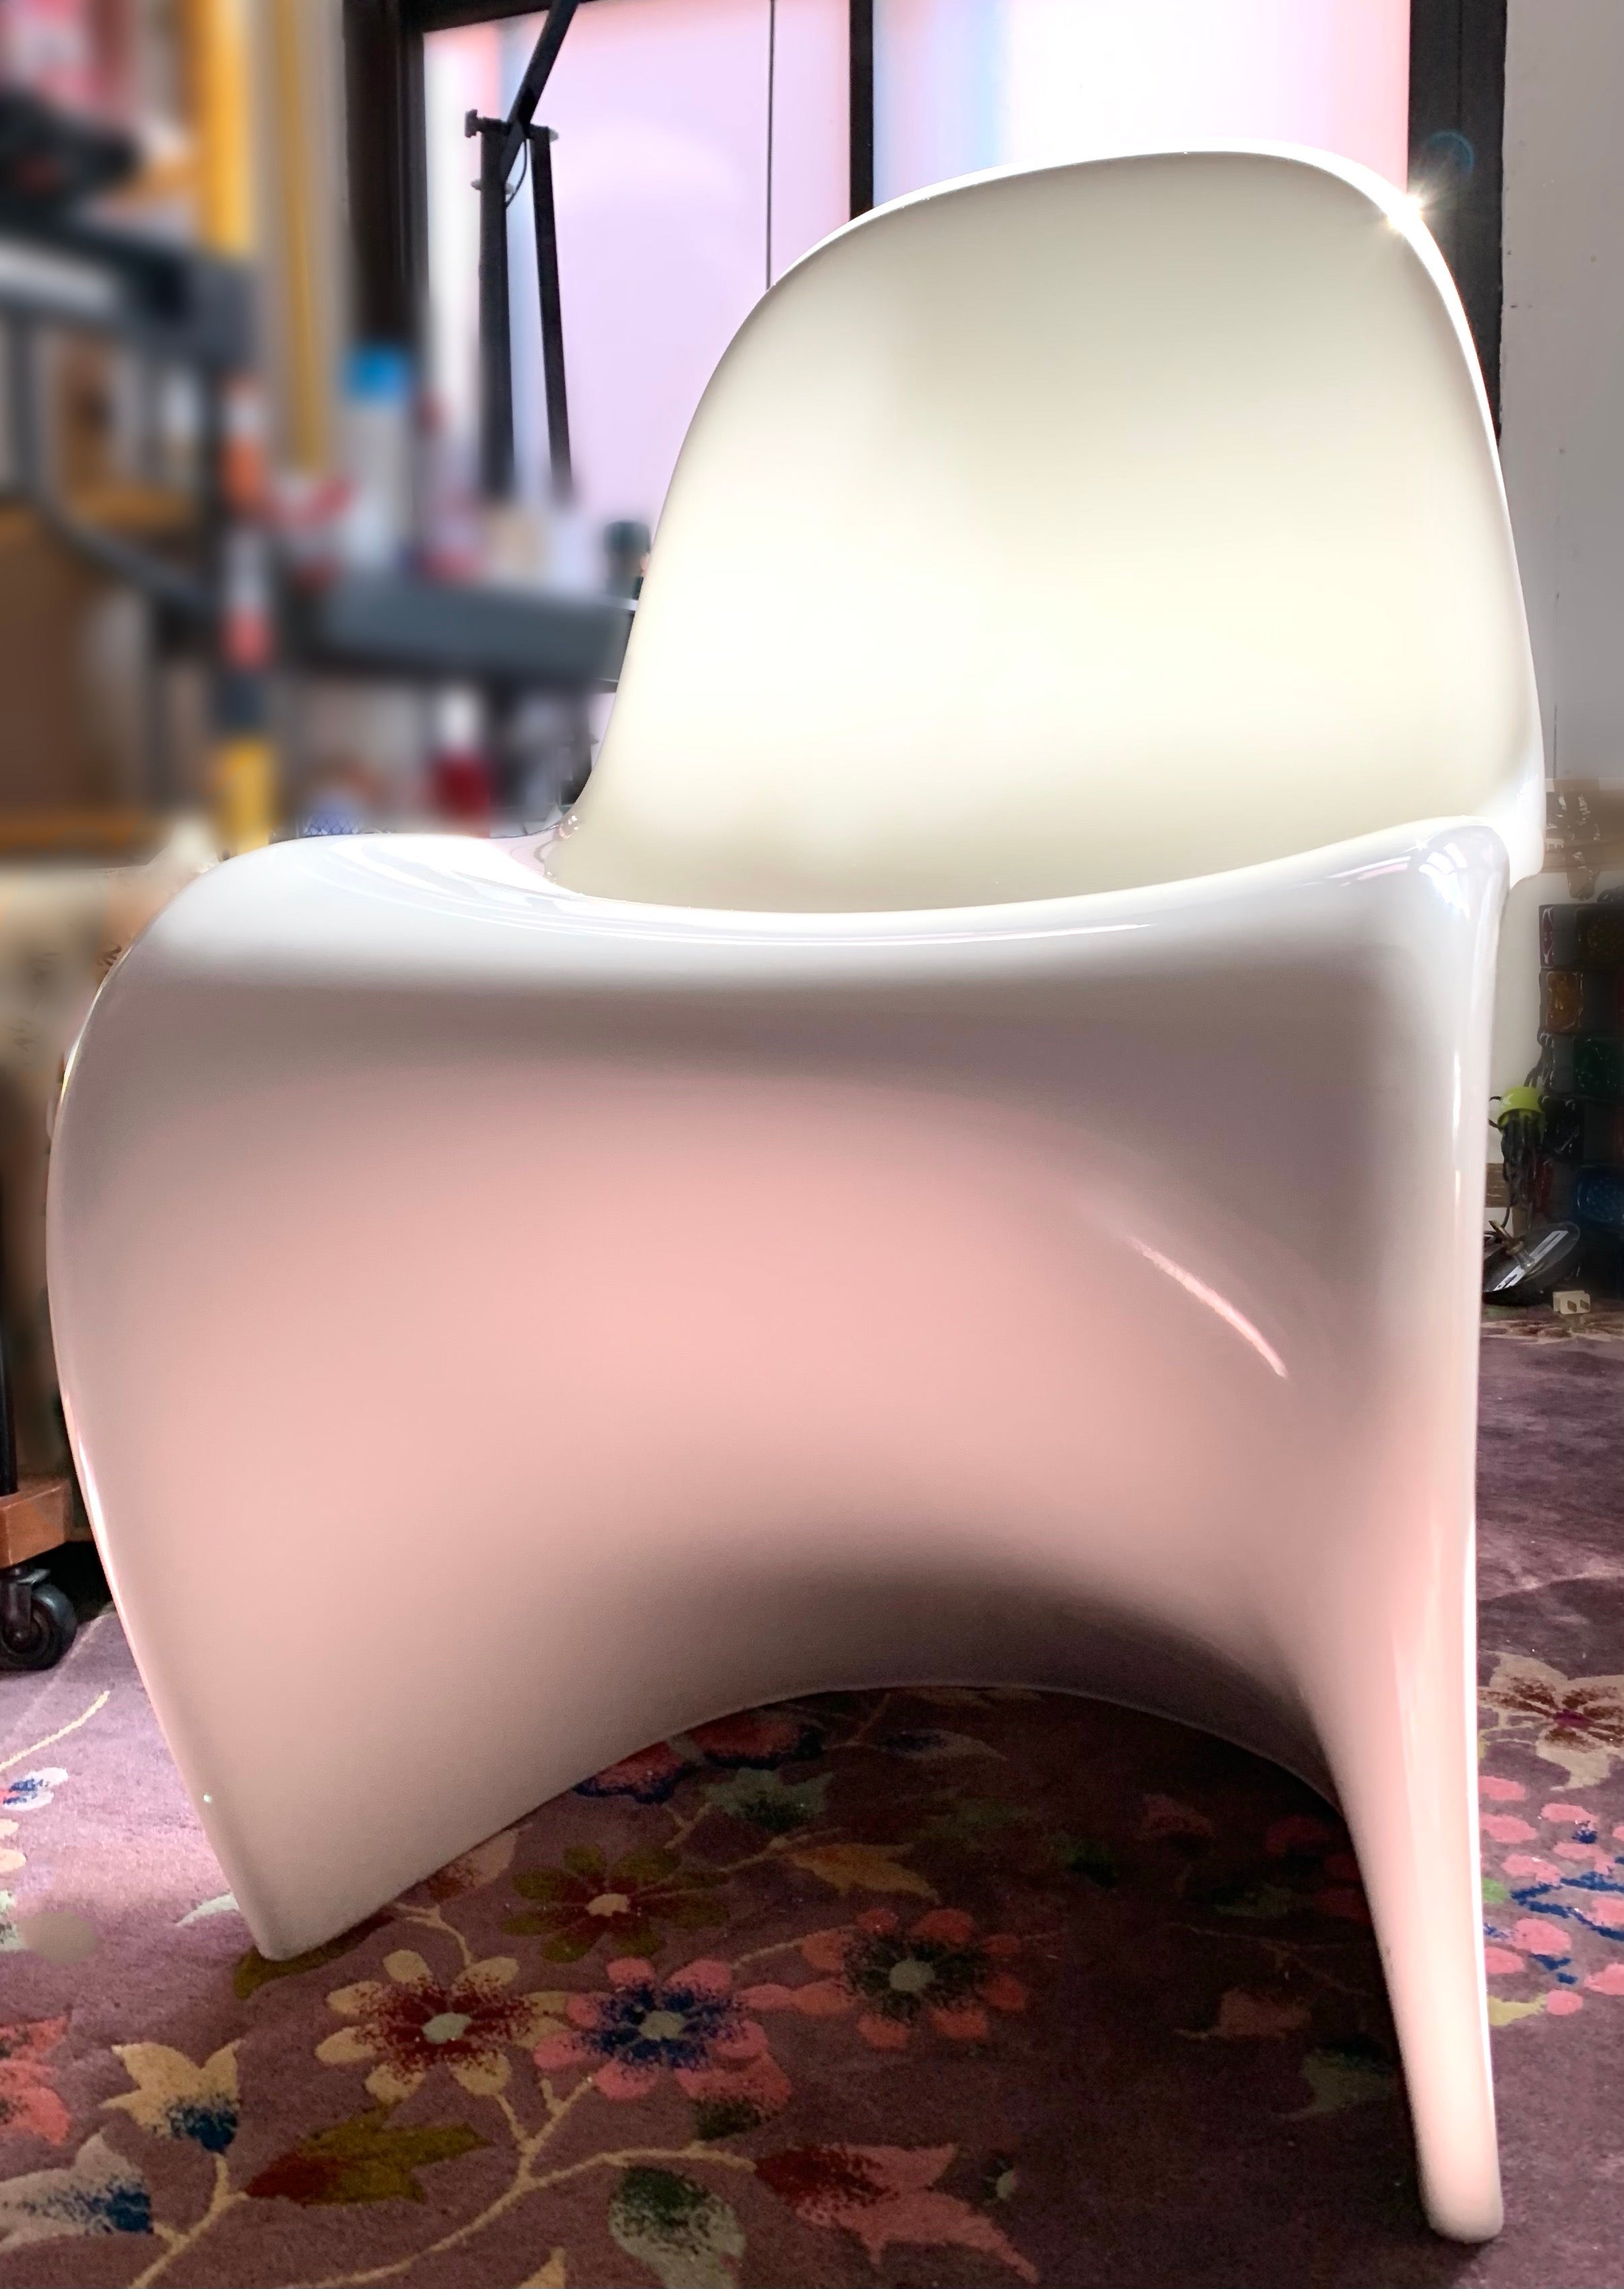 Verner Panton for Vitra Glow Panton chair, Luminescent, white, limited edition, on occasion of 50th anniversary. 1000 luminescent produced. 
After several years of joint development by Verner Panton and Vitra, the Panton chair was finally ready for